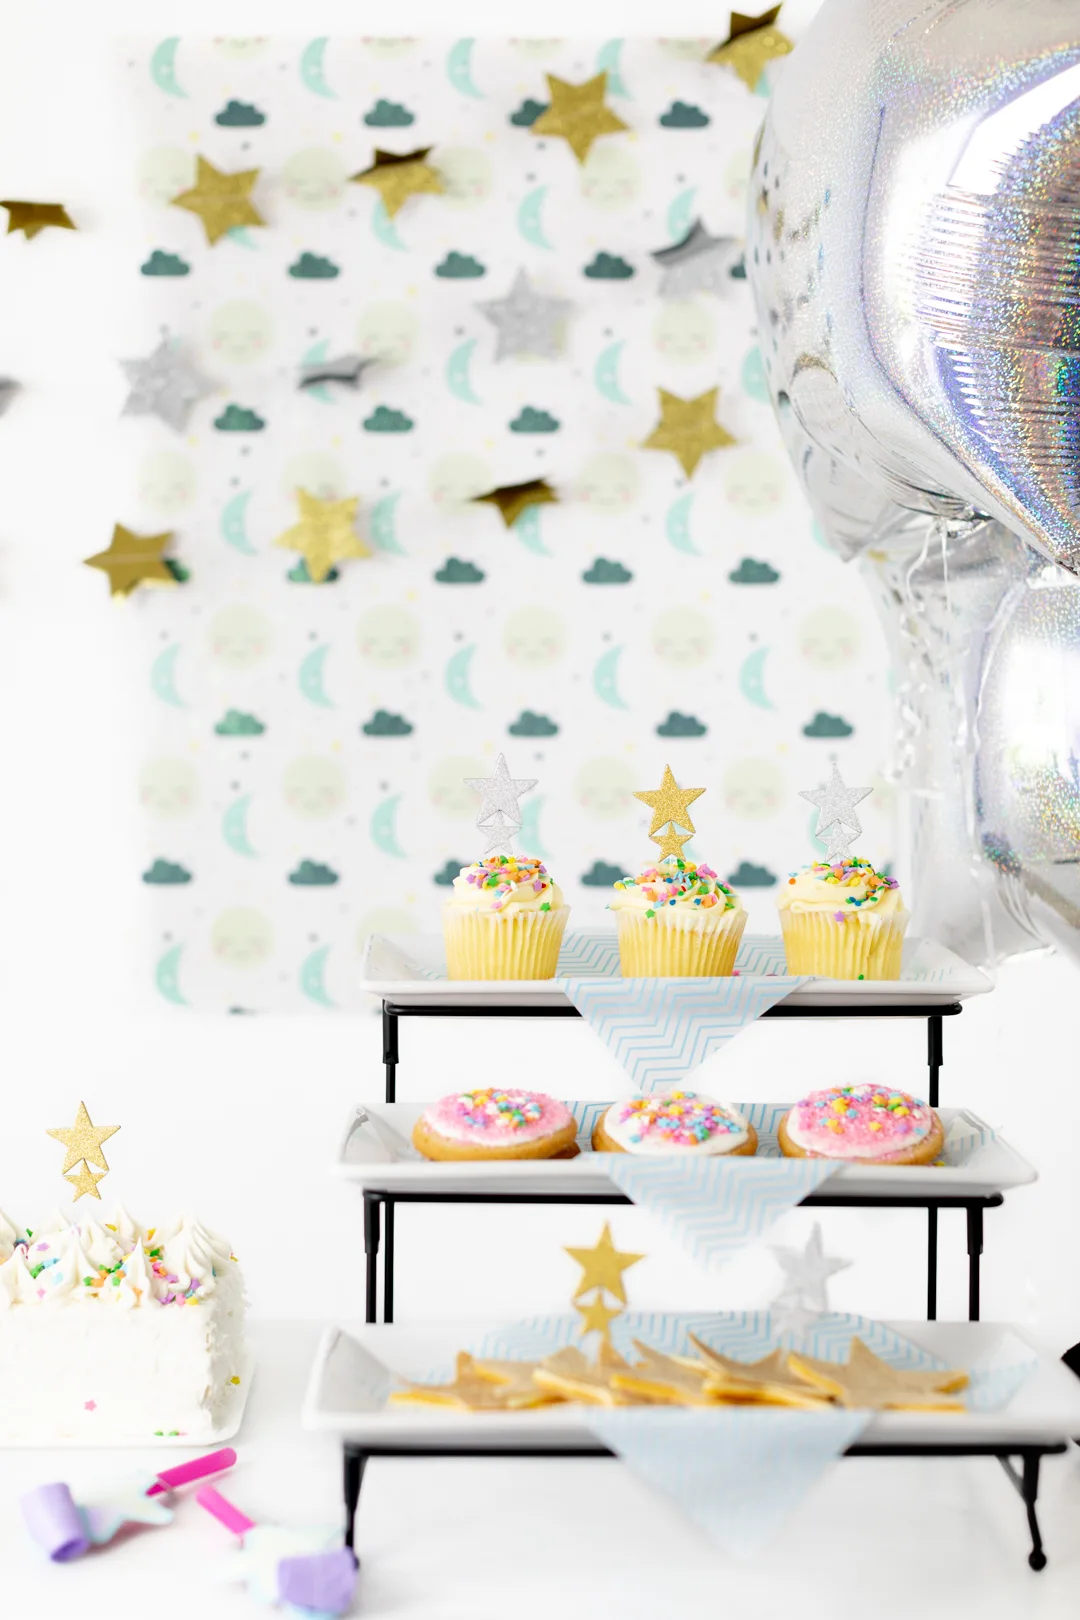 tiered stand with party treats